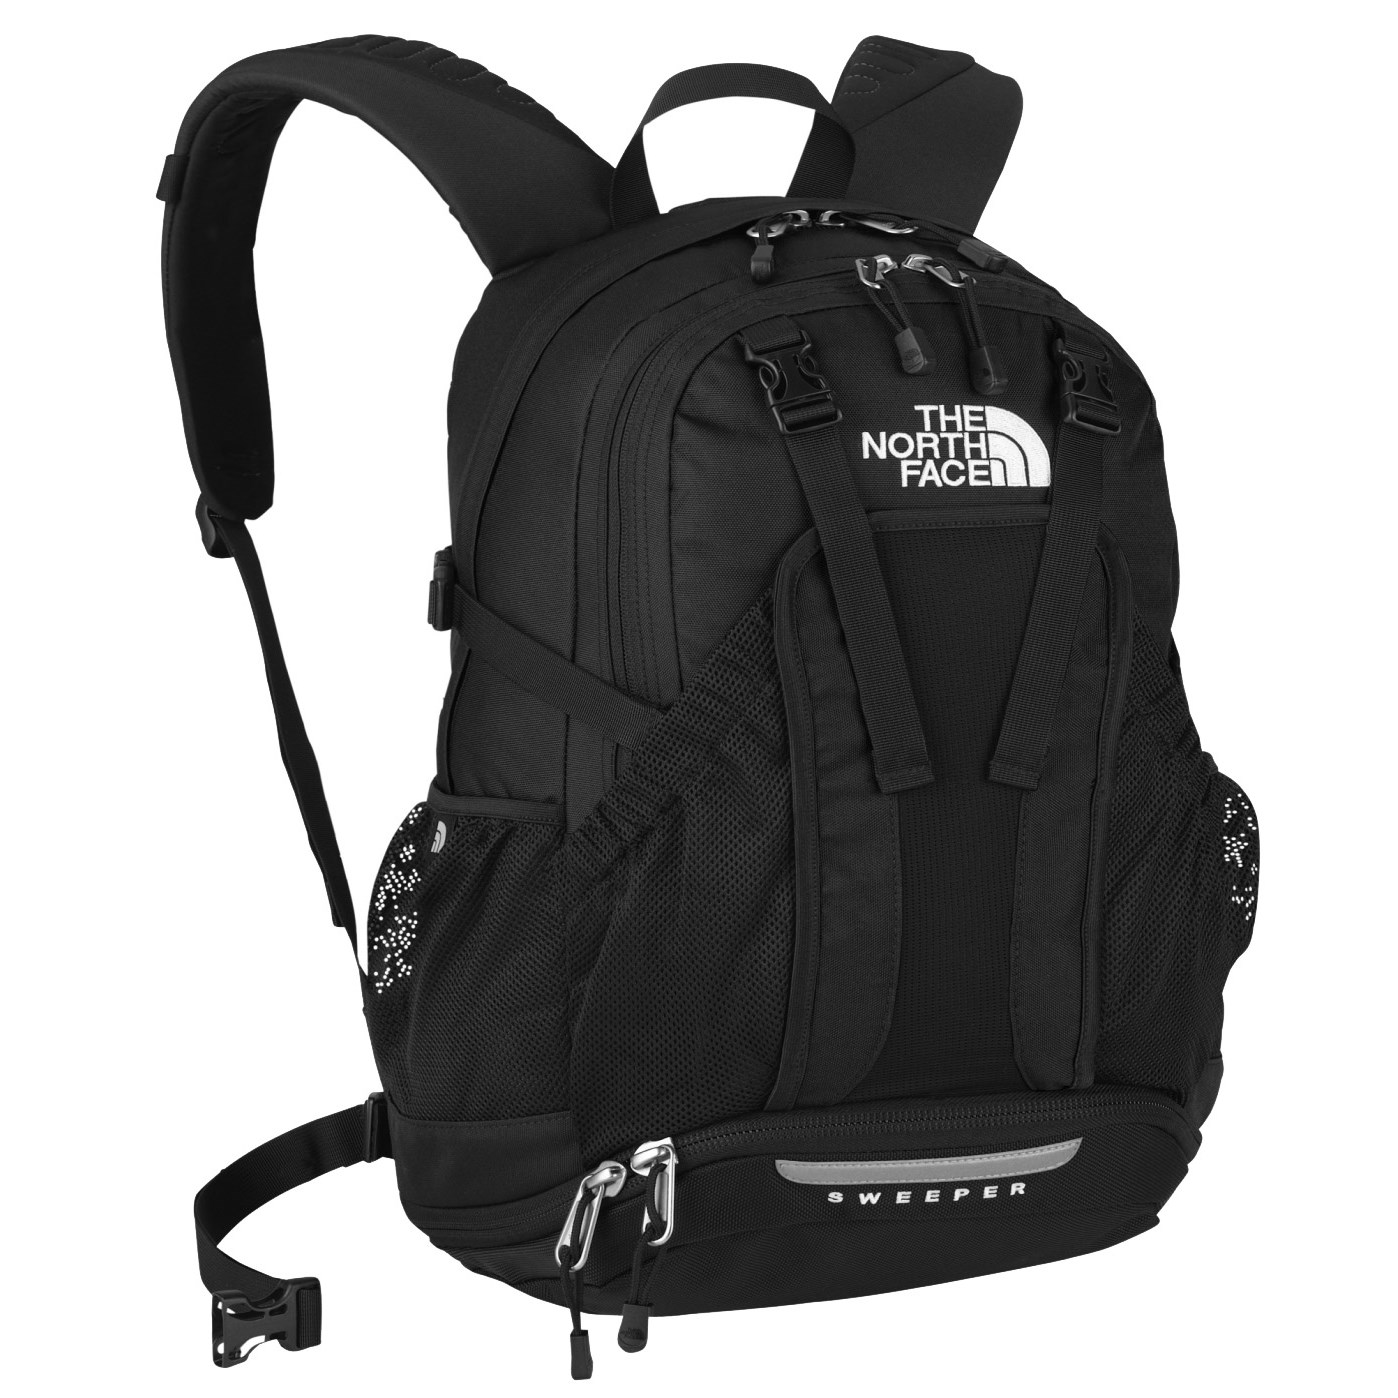 the north face sweeper backpack